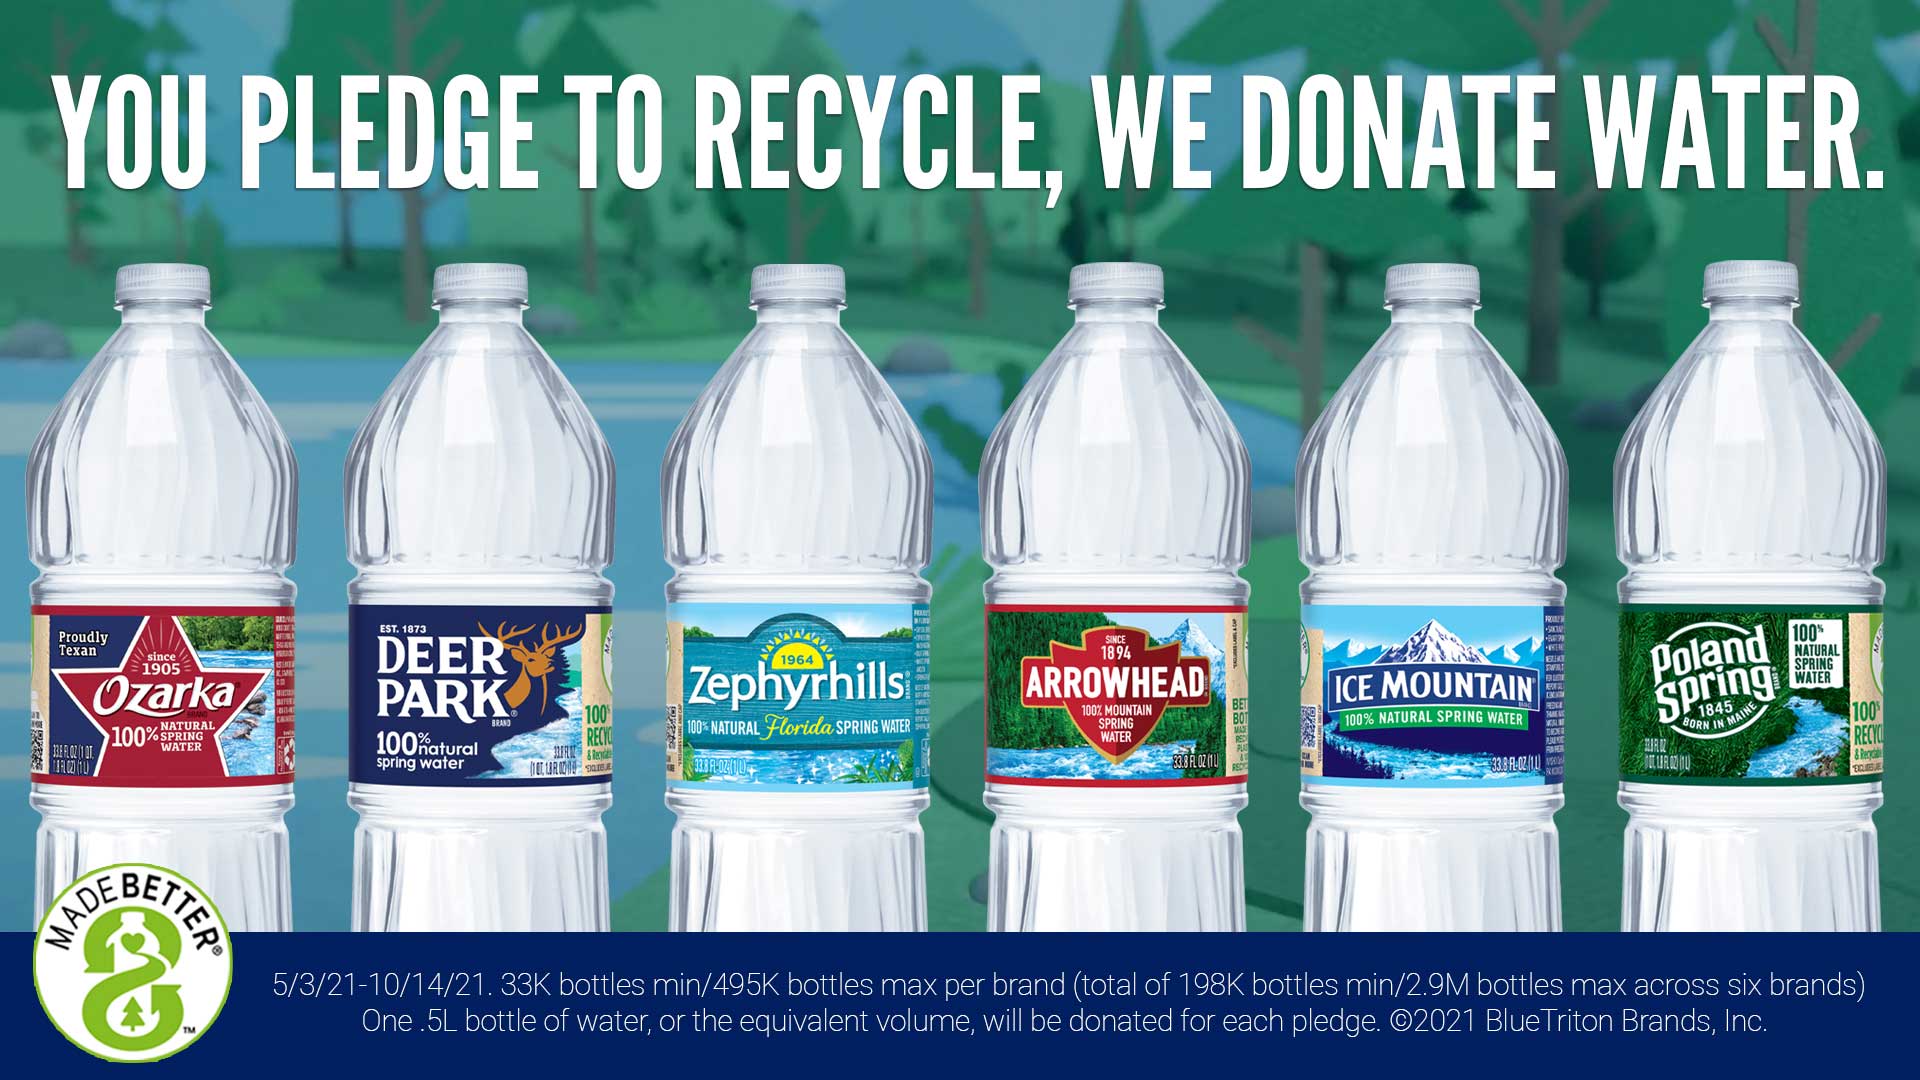 Poland Spring® Brand 100% Natural Spring Water, America’s leading spring water brand, along with its five regional spring water sister brands, announces a new national campaign – Made For A Better Tomorrow.